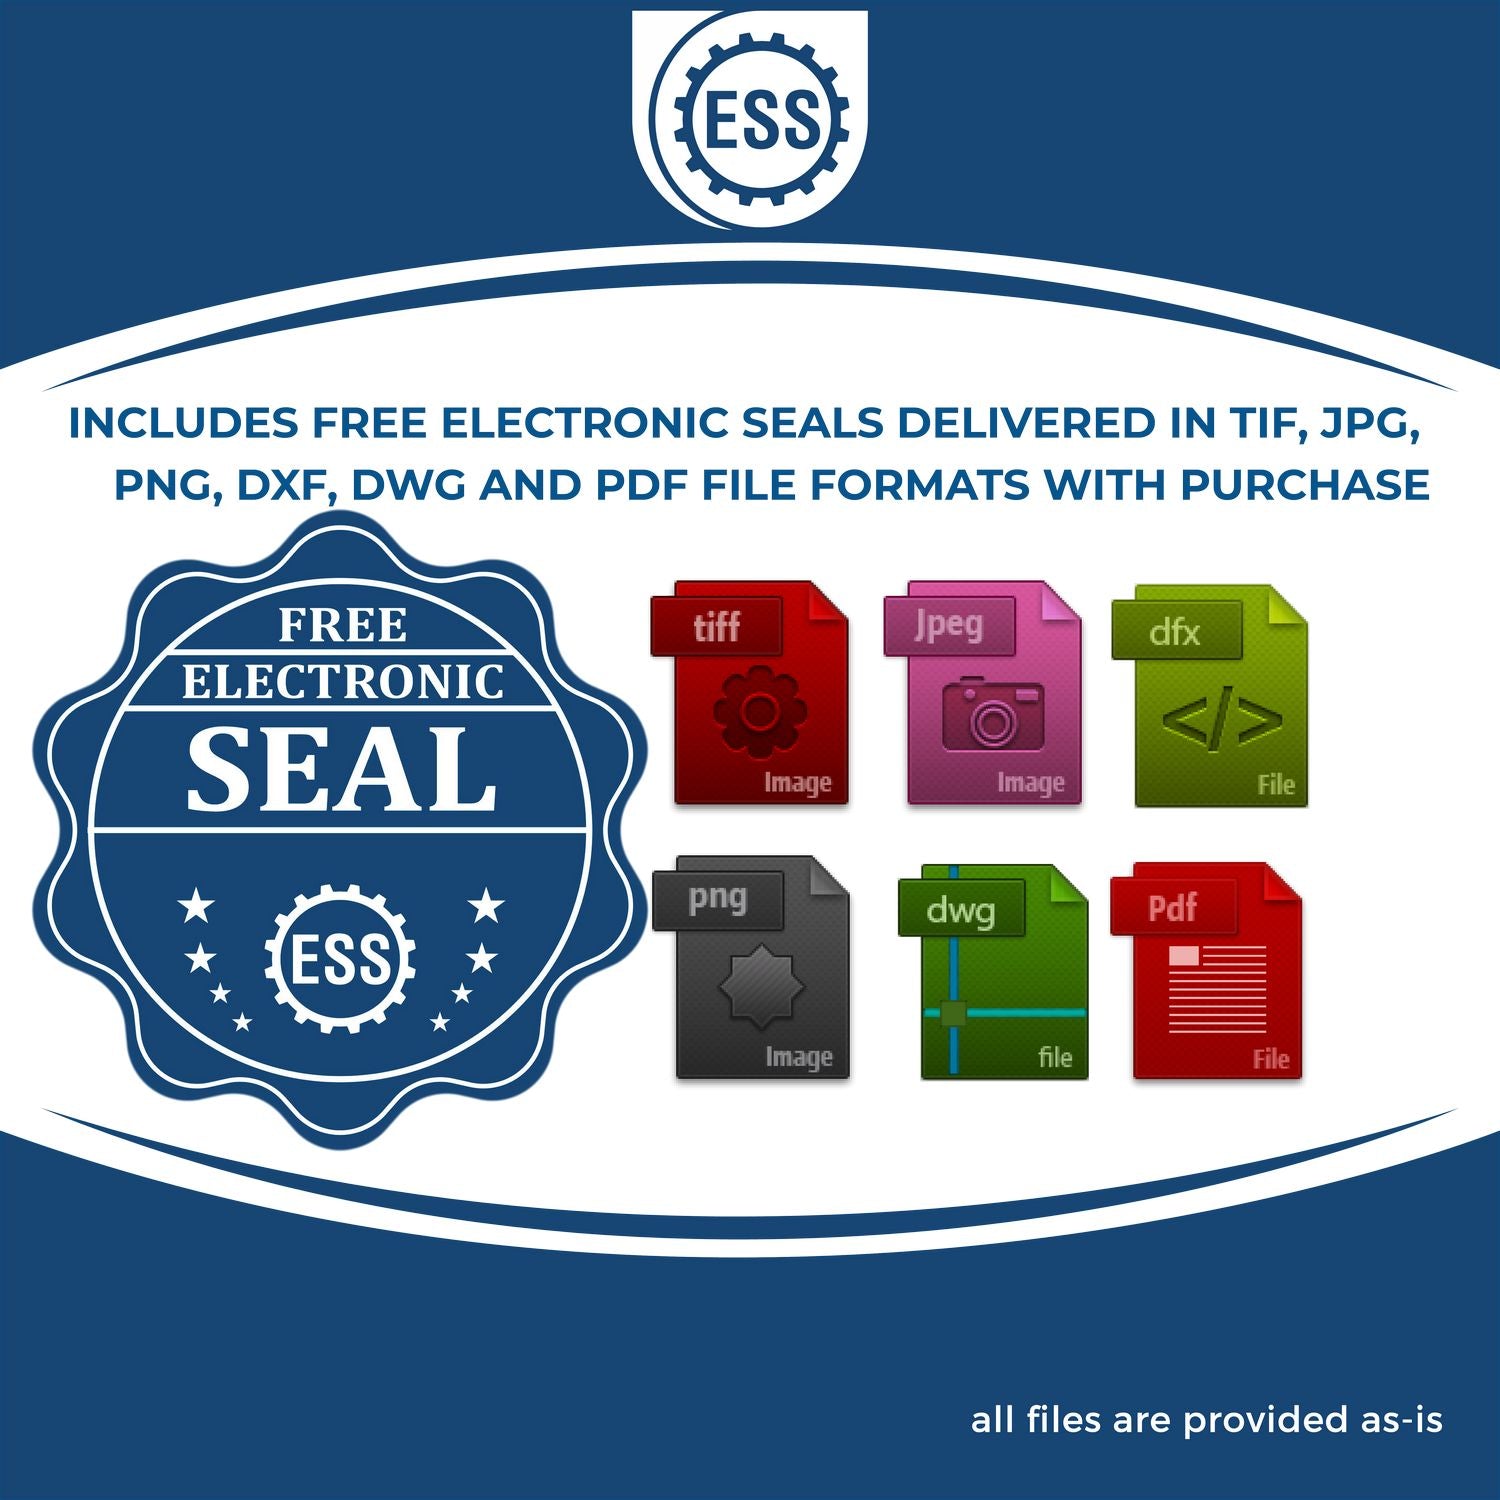 An infographic for the free electronic seal for the Extended Long Reach New York Surveyor Embosser illustrating the different file type icons such as DXF, DWG, TIF, JPG and PNG.